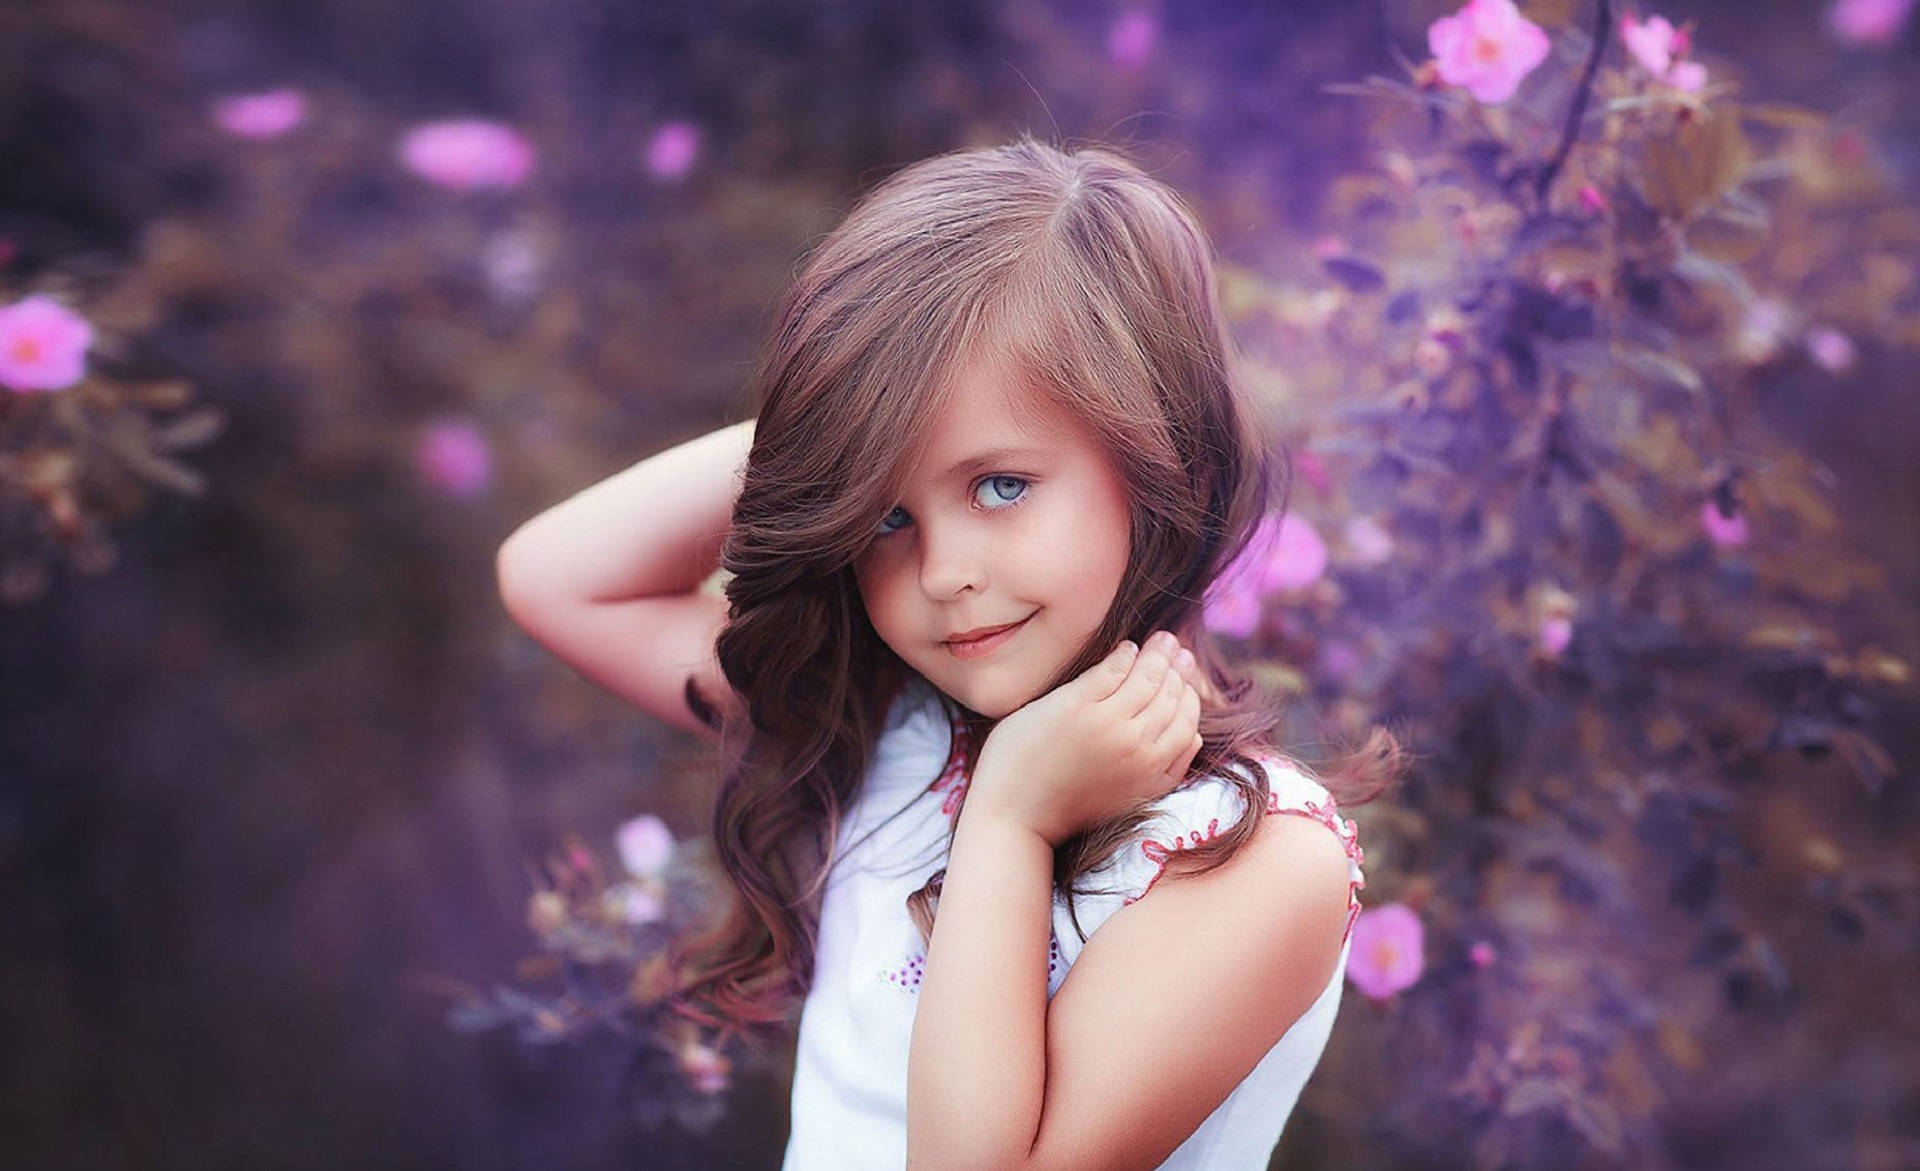 Free Baby Girl Wallpaper Downloads, [200+] Baby Girl Wallpapers for FREE |  